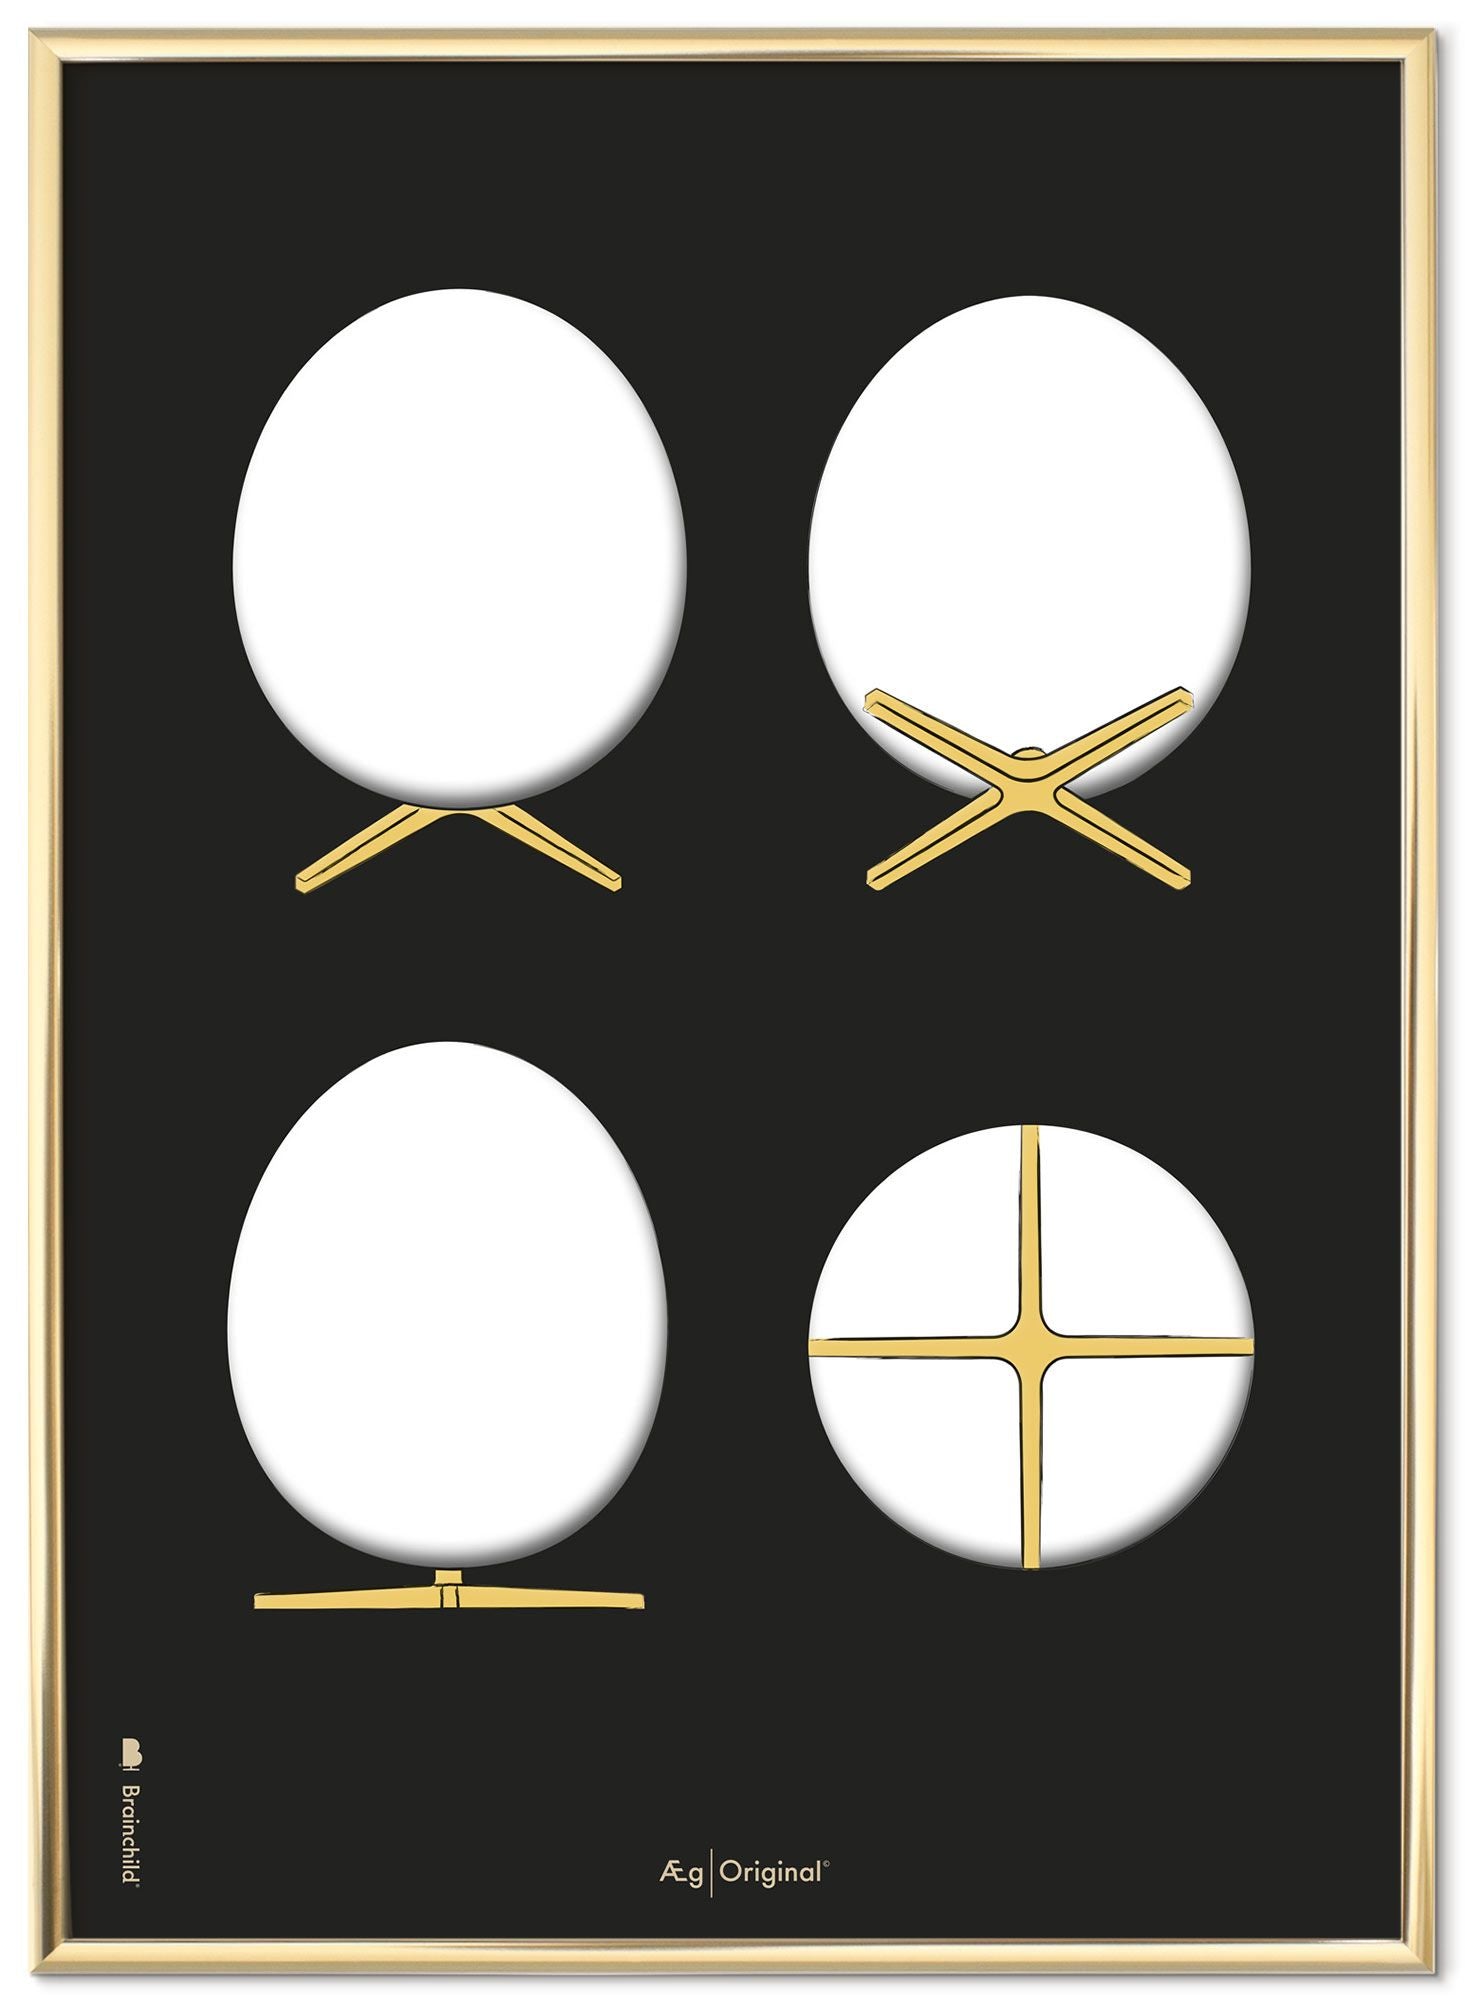 Brainchild The Egg Design Sketches Poster Frame Made Of Brass Colored Metal A5, Black Background